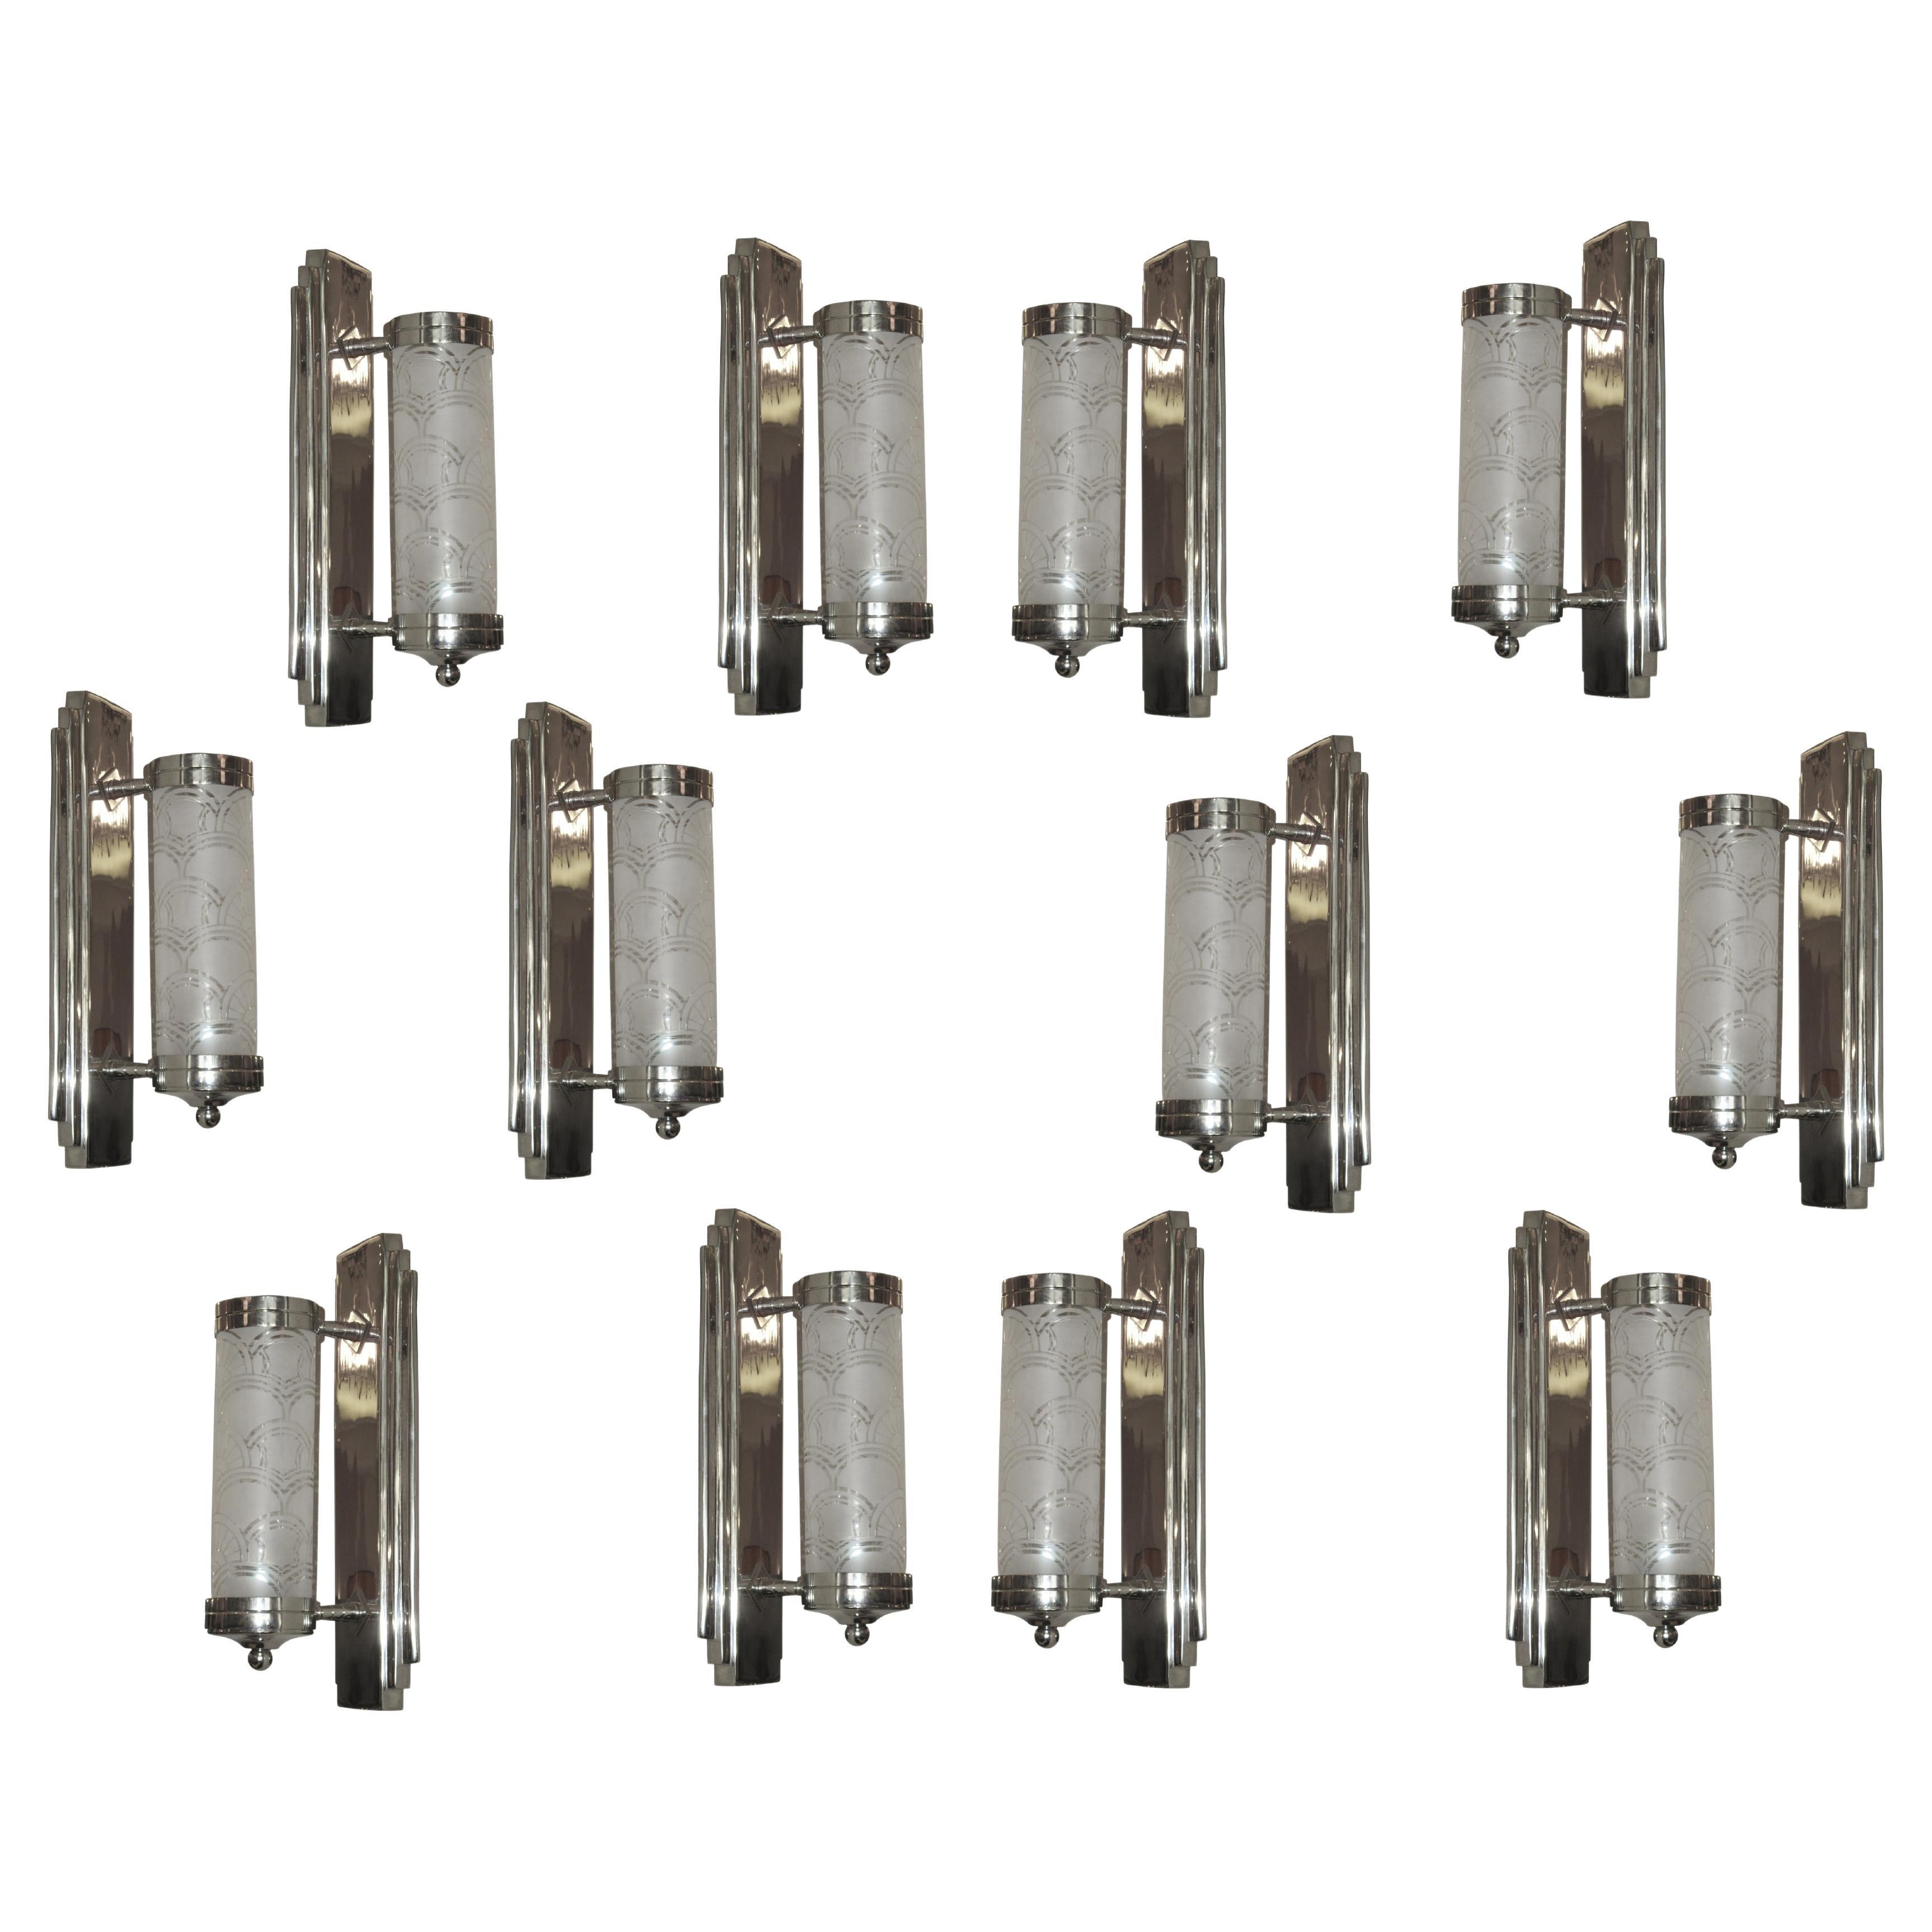 12 Sconces in Chrome and Glass, Style, Art Deco, Year, 1930, German